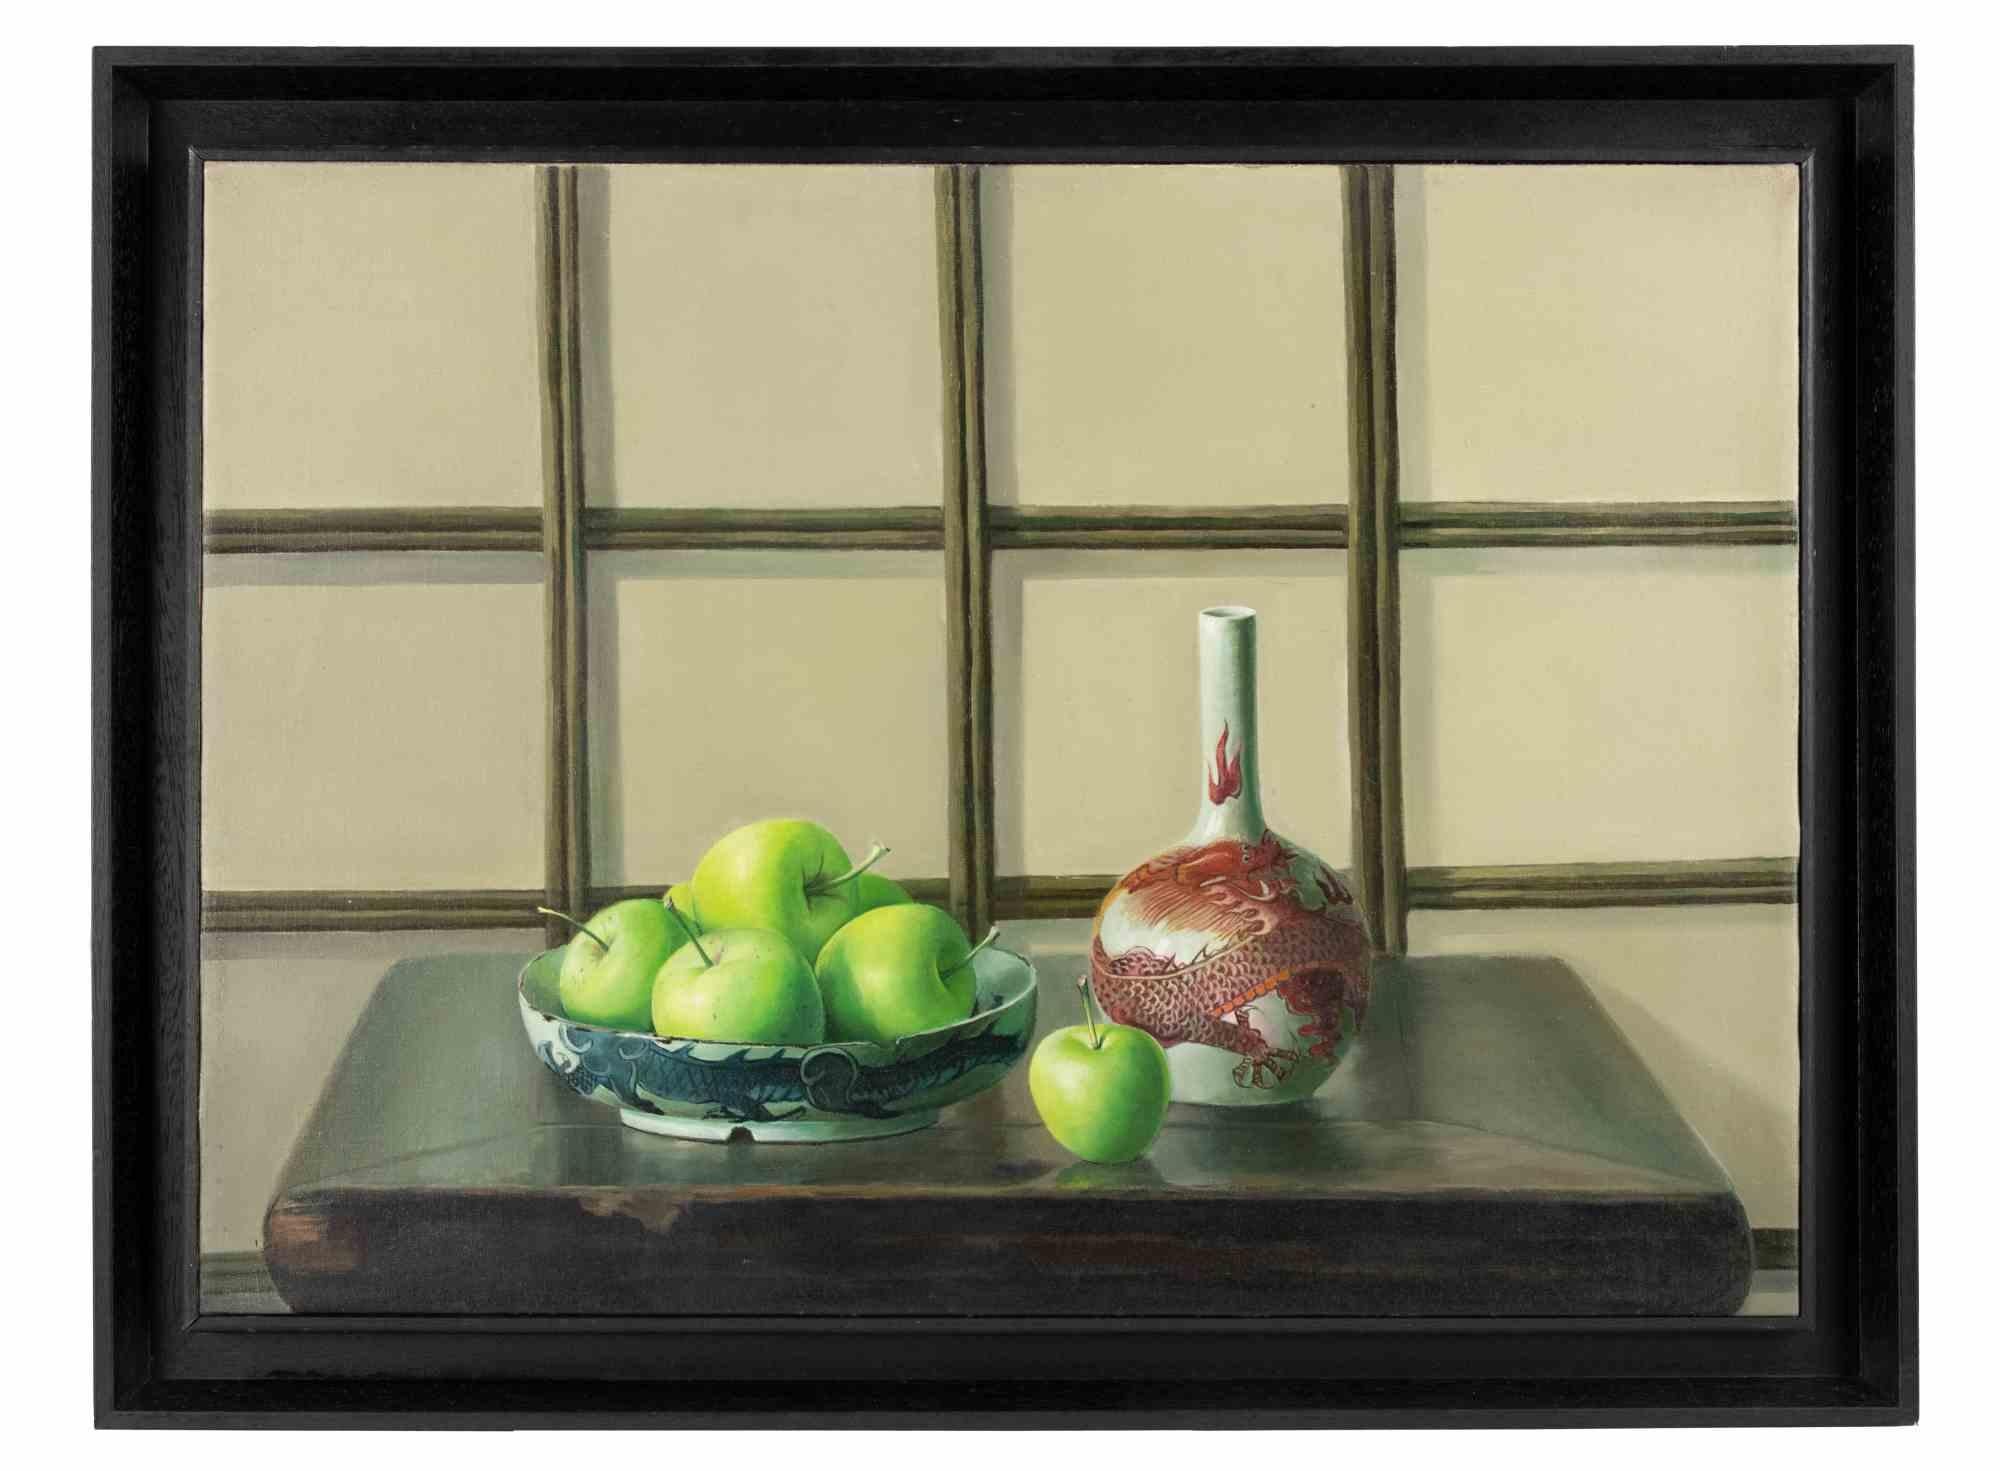 Still Life is an original oil painting realized  by Zhang Wei Guang (Mirror) in 2000s.

Includes frame.

Signature and various signs in Chinese calligraphy on the back.

Good conditions.

Zhang Wei Guang, also called ‘mirror' was born in Helong